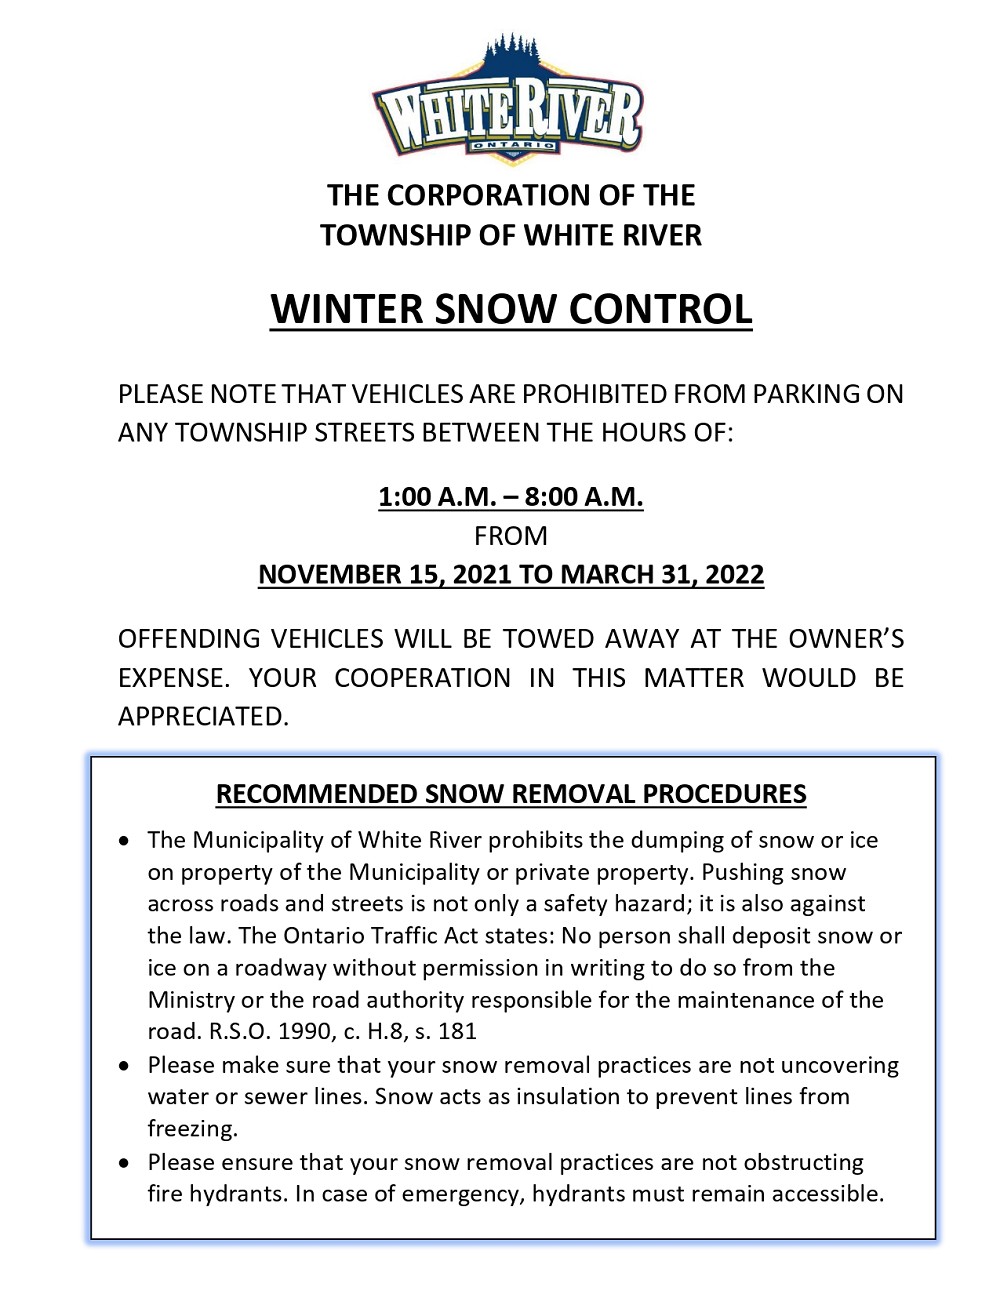 snow-control-flyer-2021_page-0001